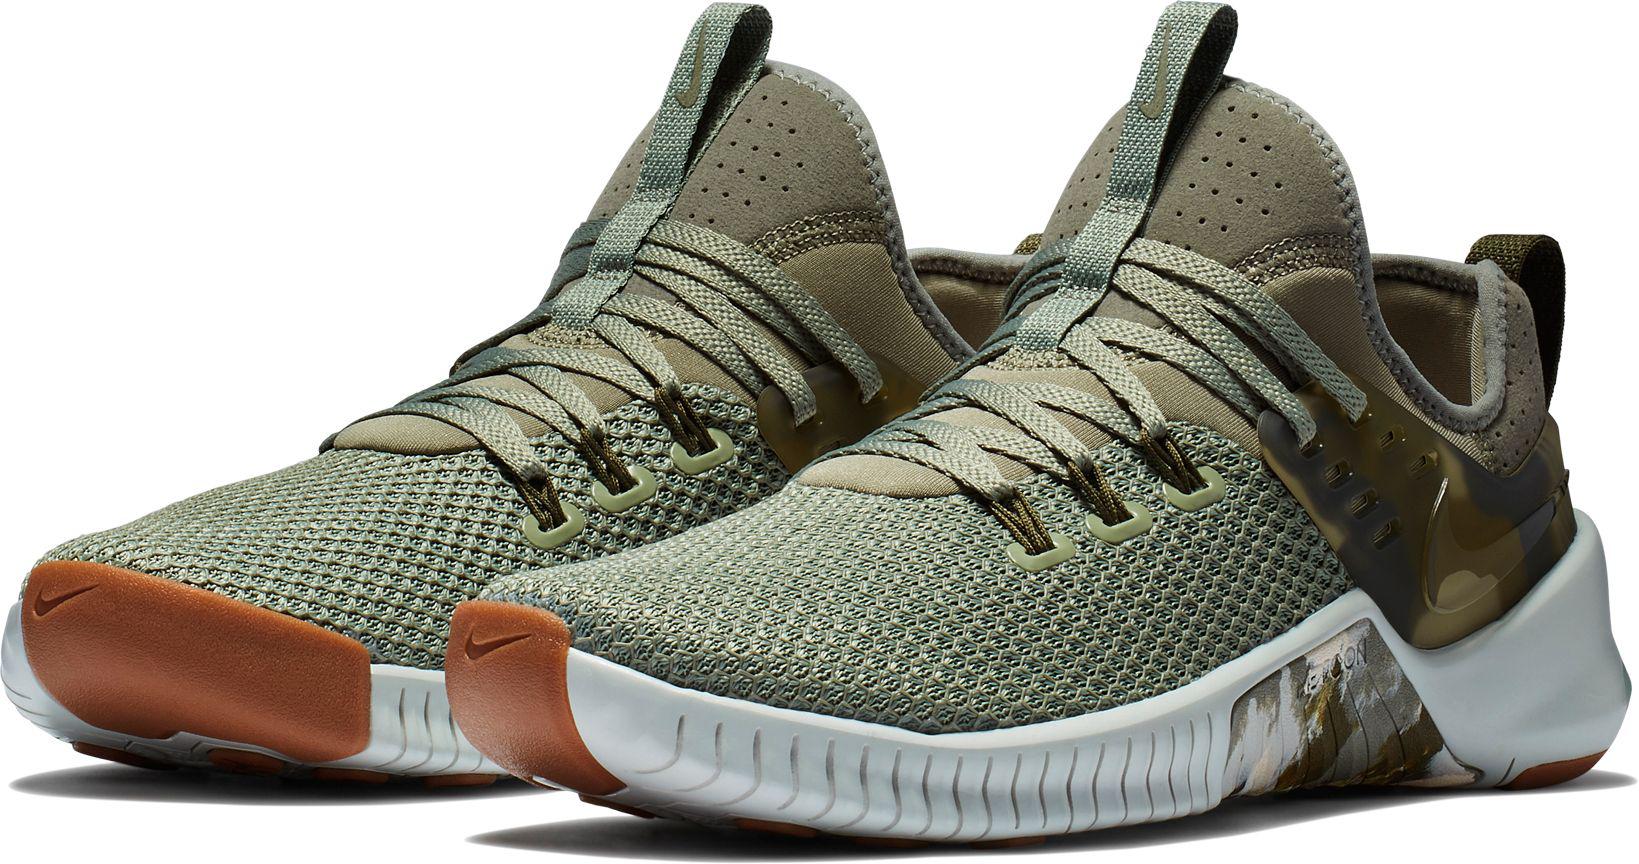 X Metcon Training Shoes in Olive/Grey 